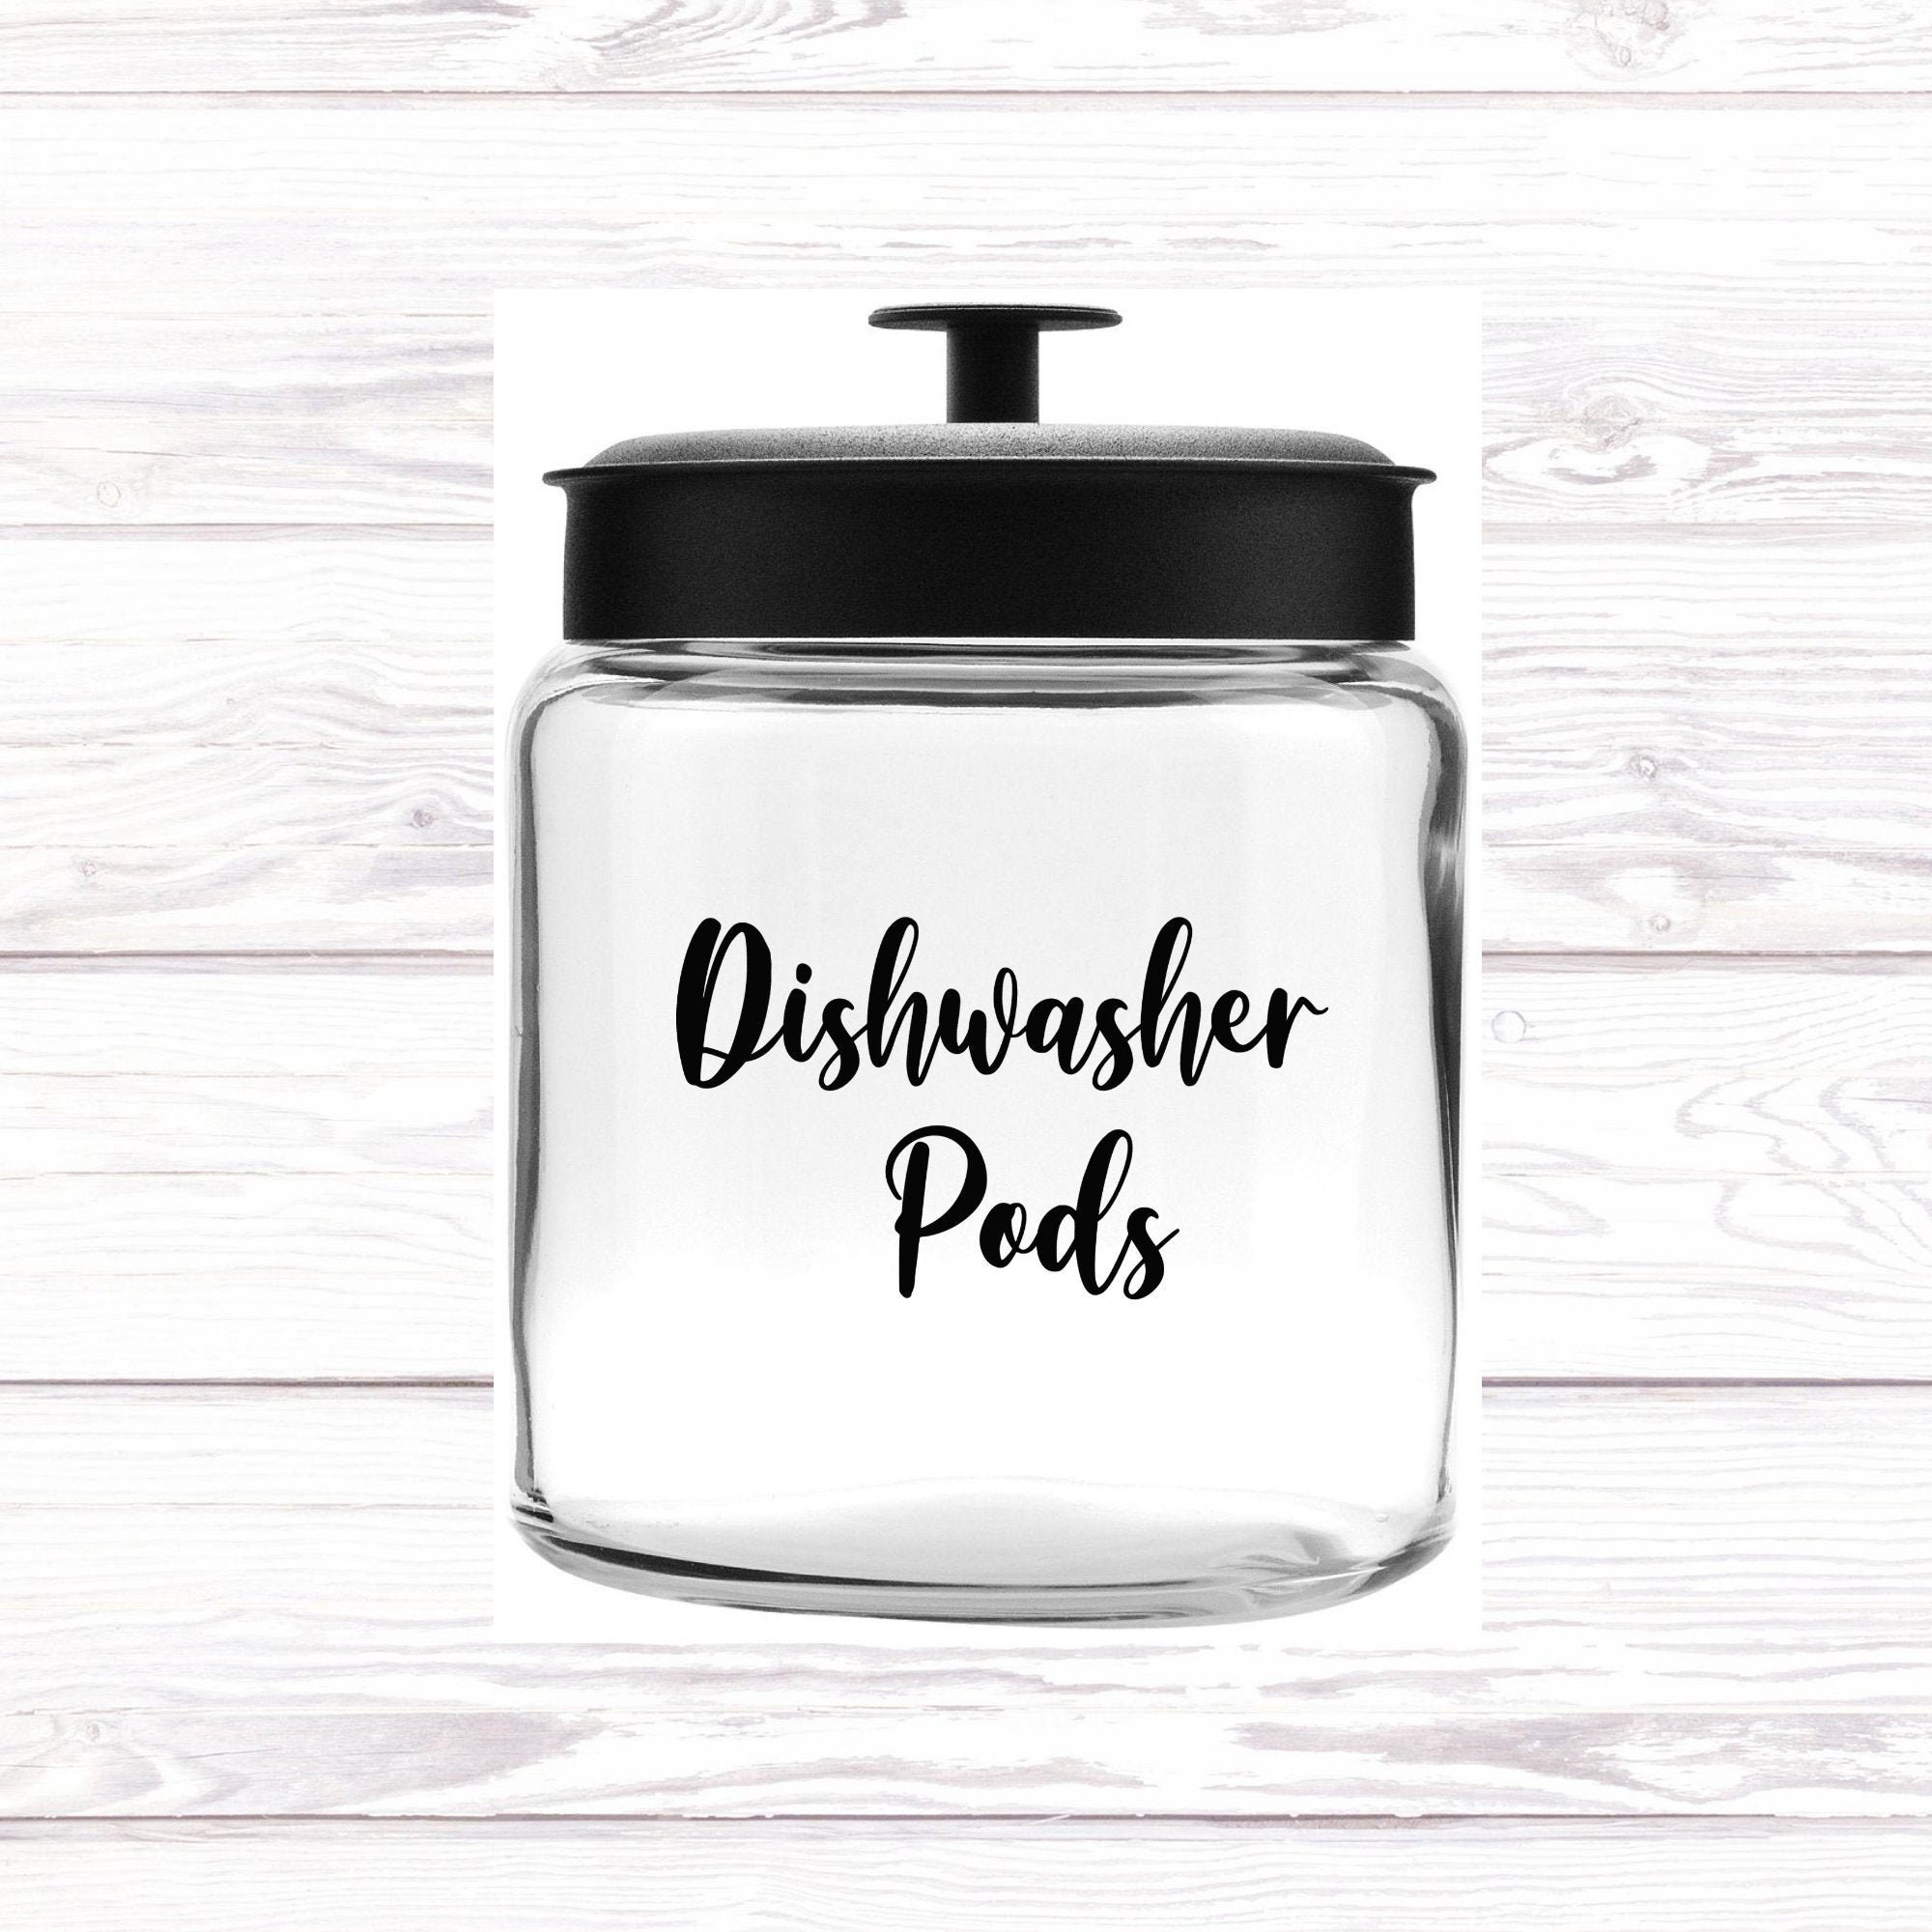 2 Dishwasher Pods Storage Solutions That Are Super Cheap  Dishwasher pods, Dishwasher  pods storage, Dishwasher pods container